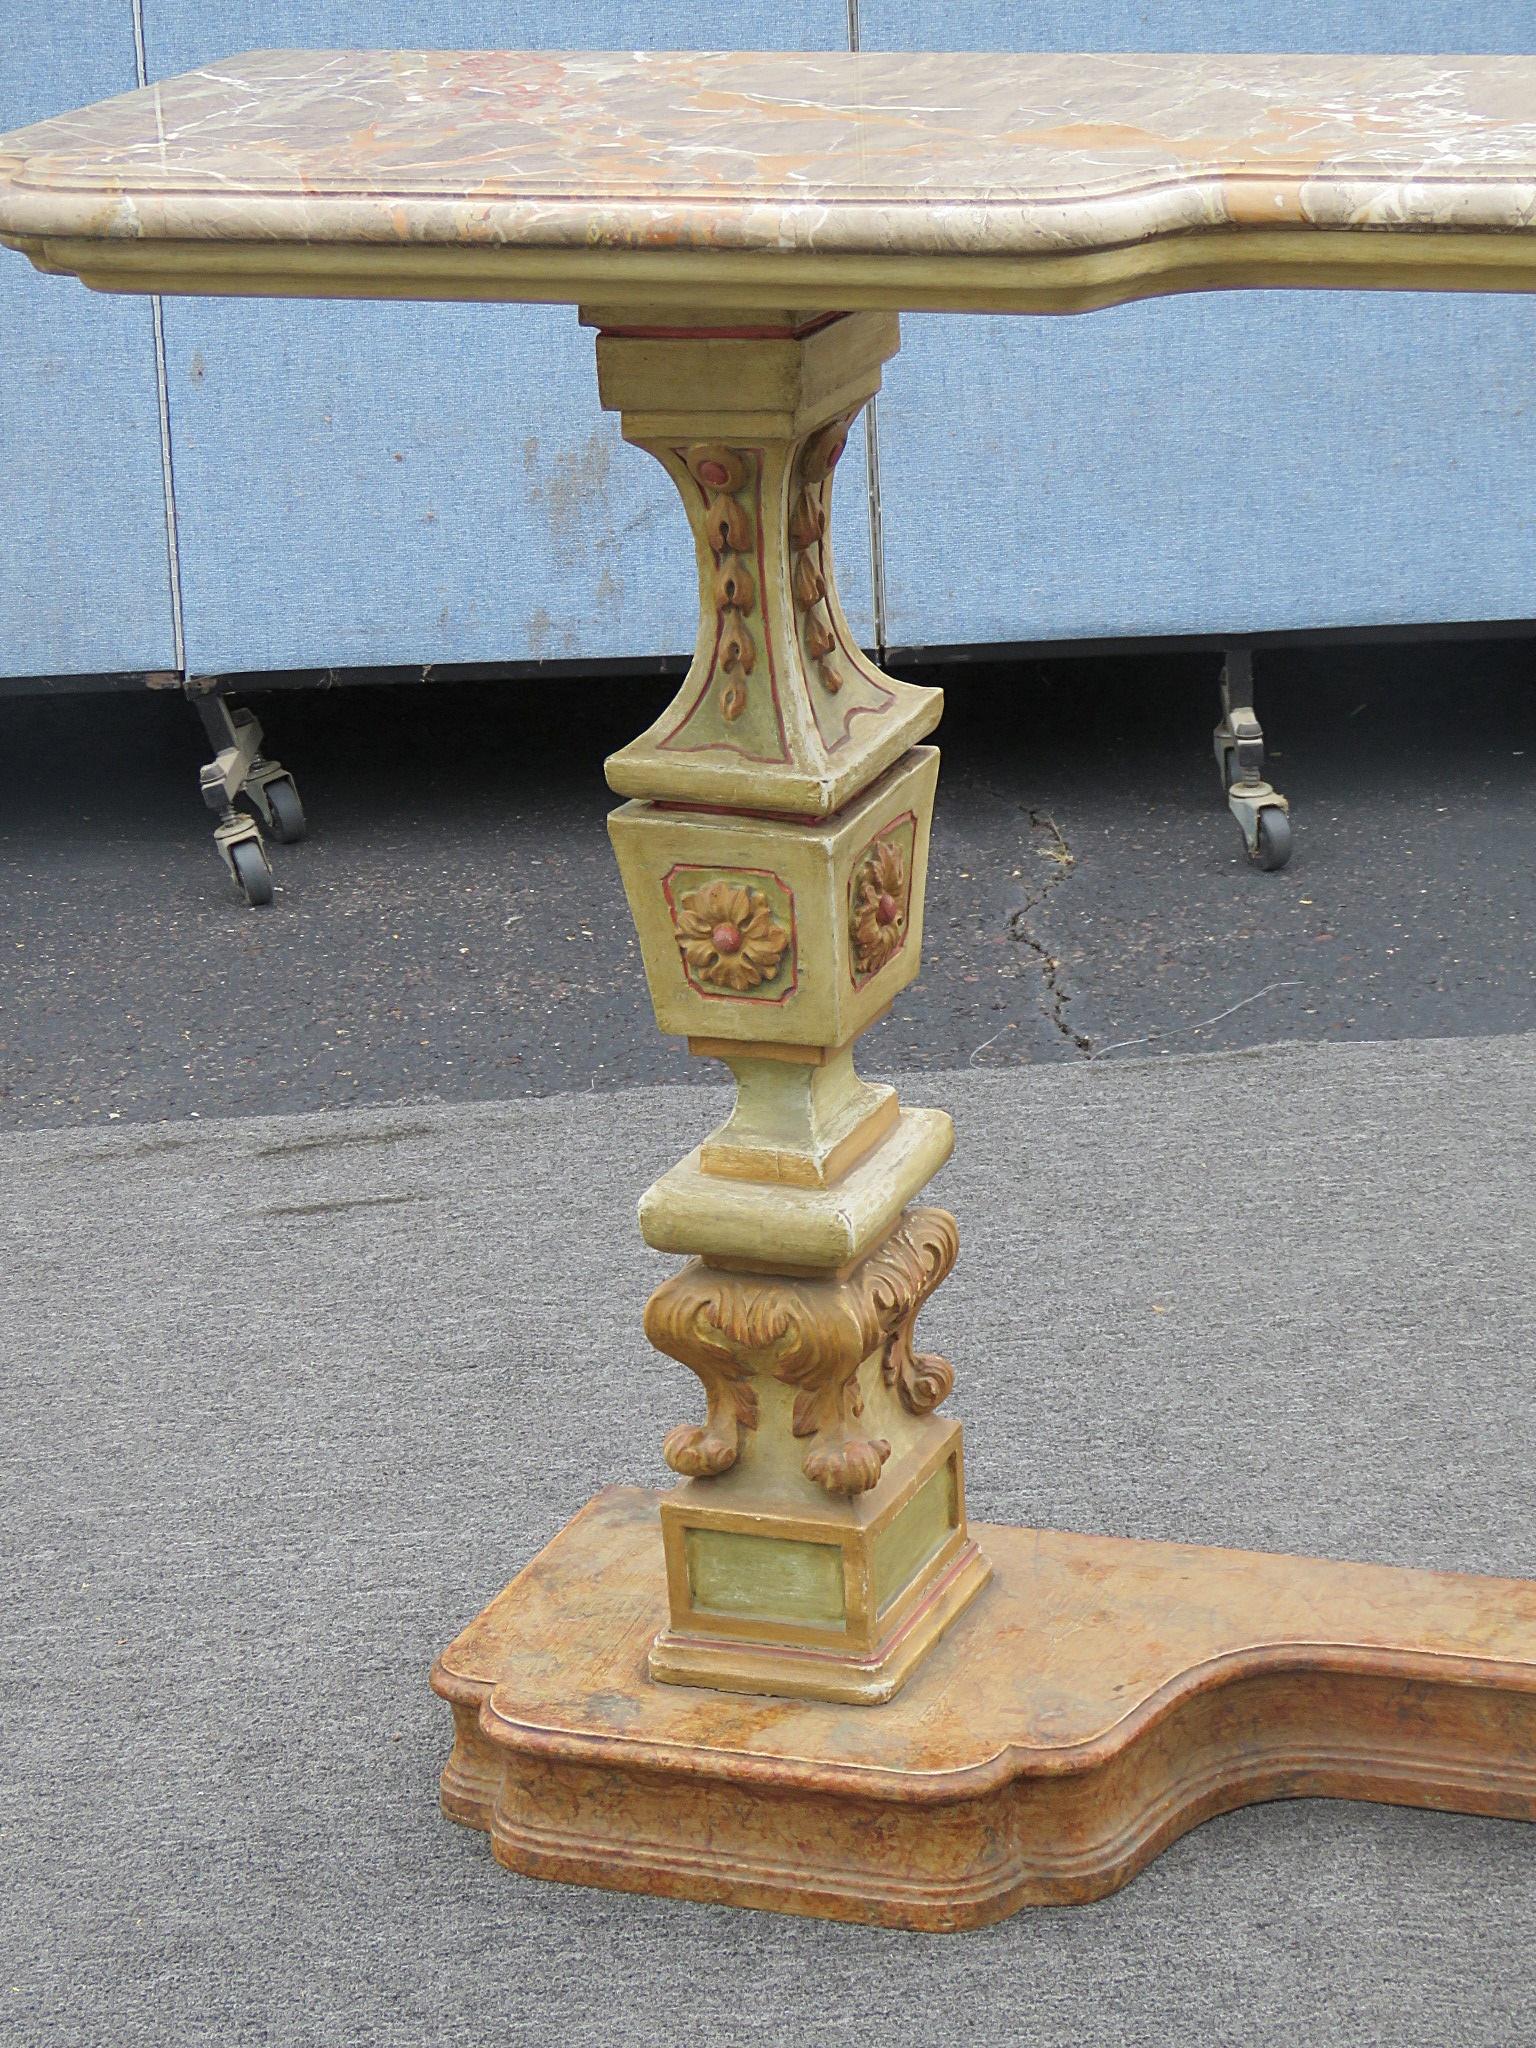 1920s console table